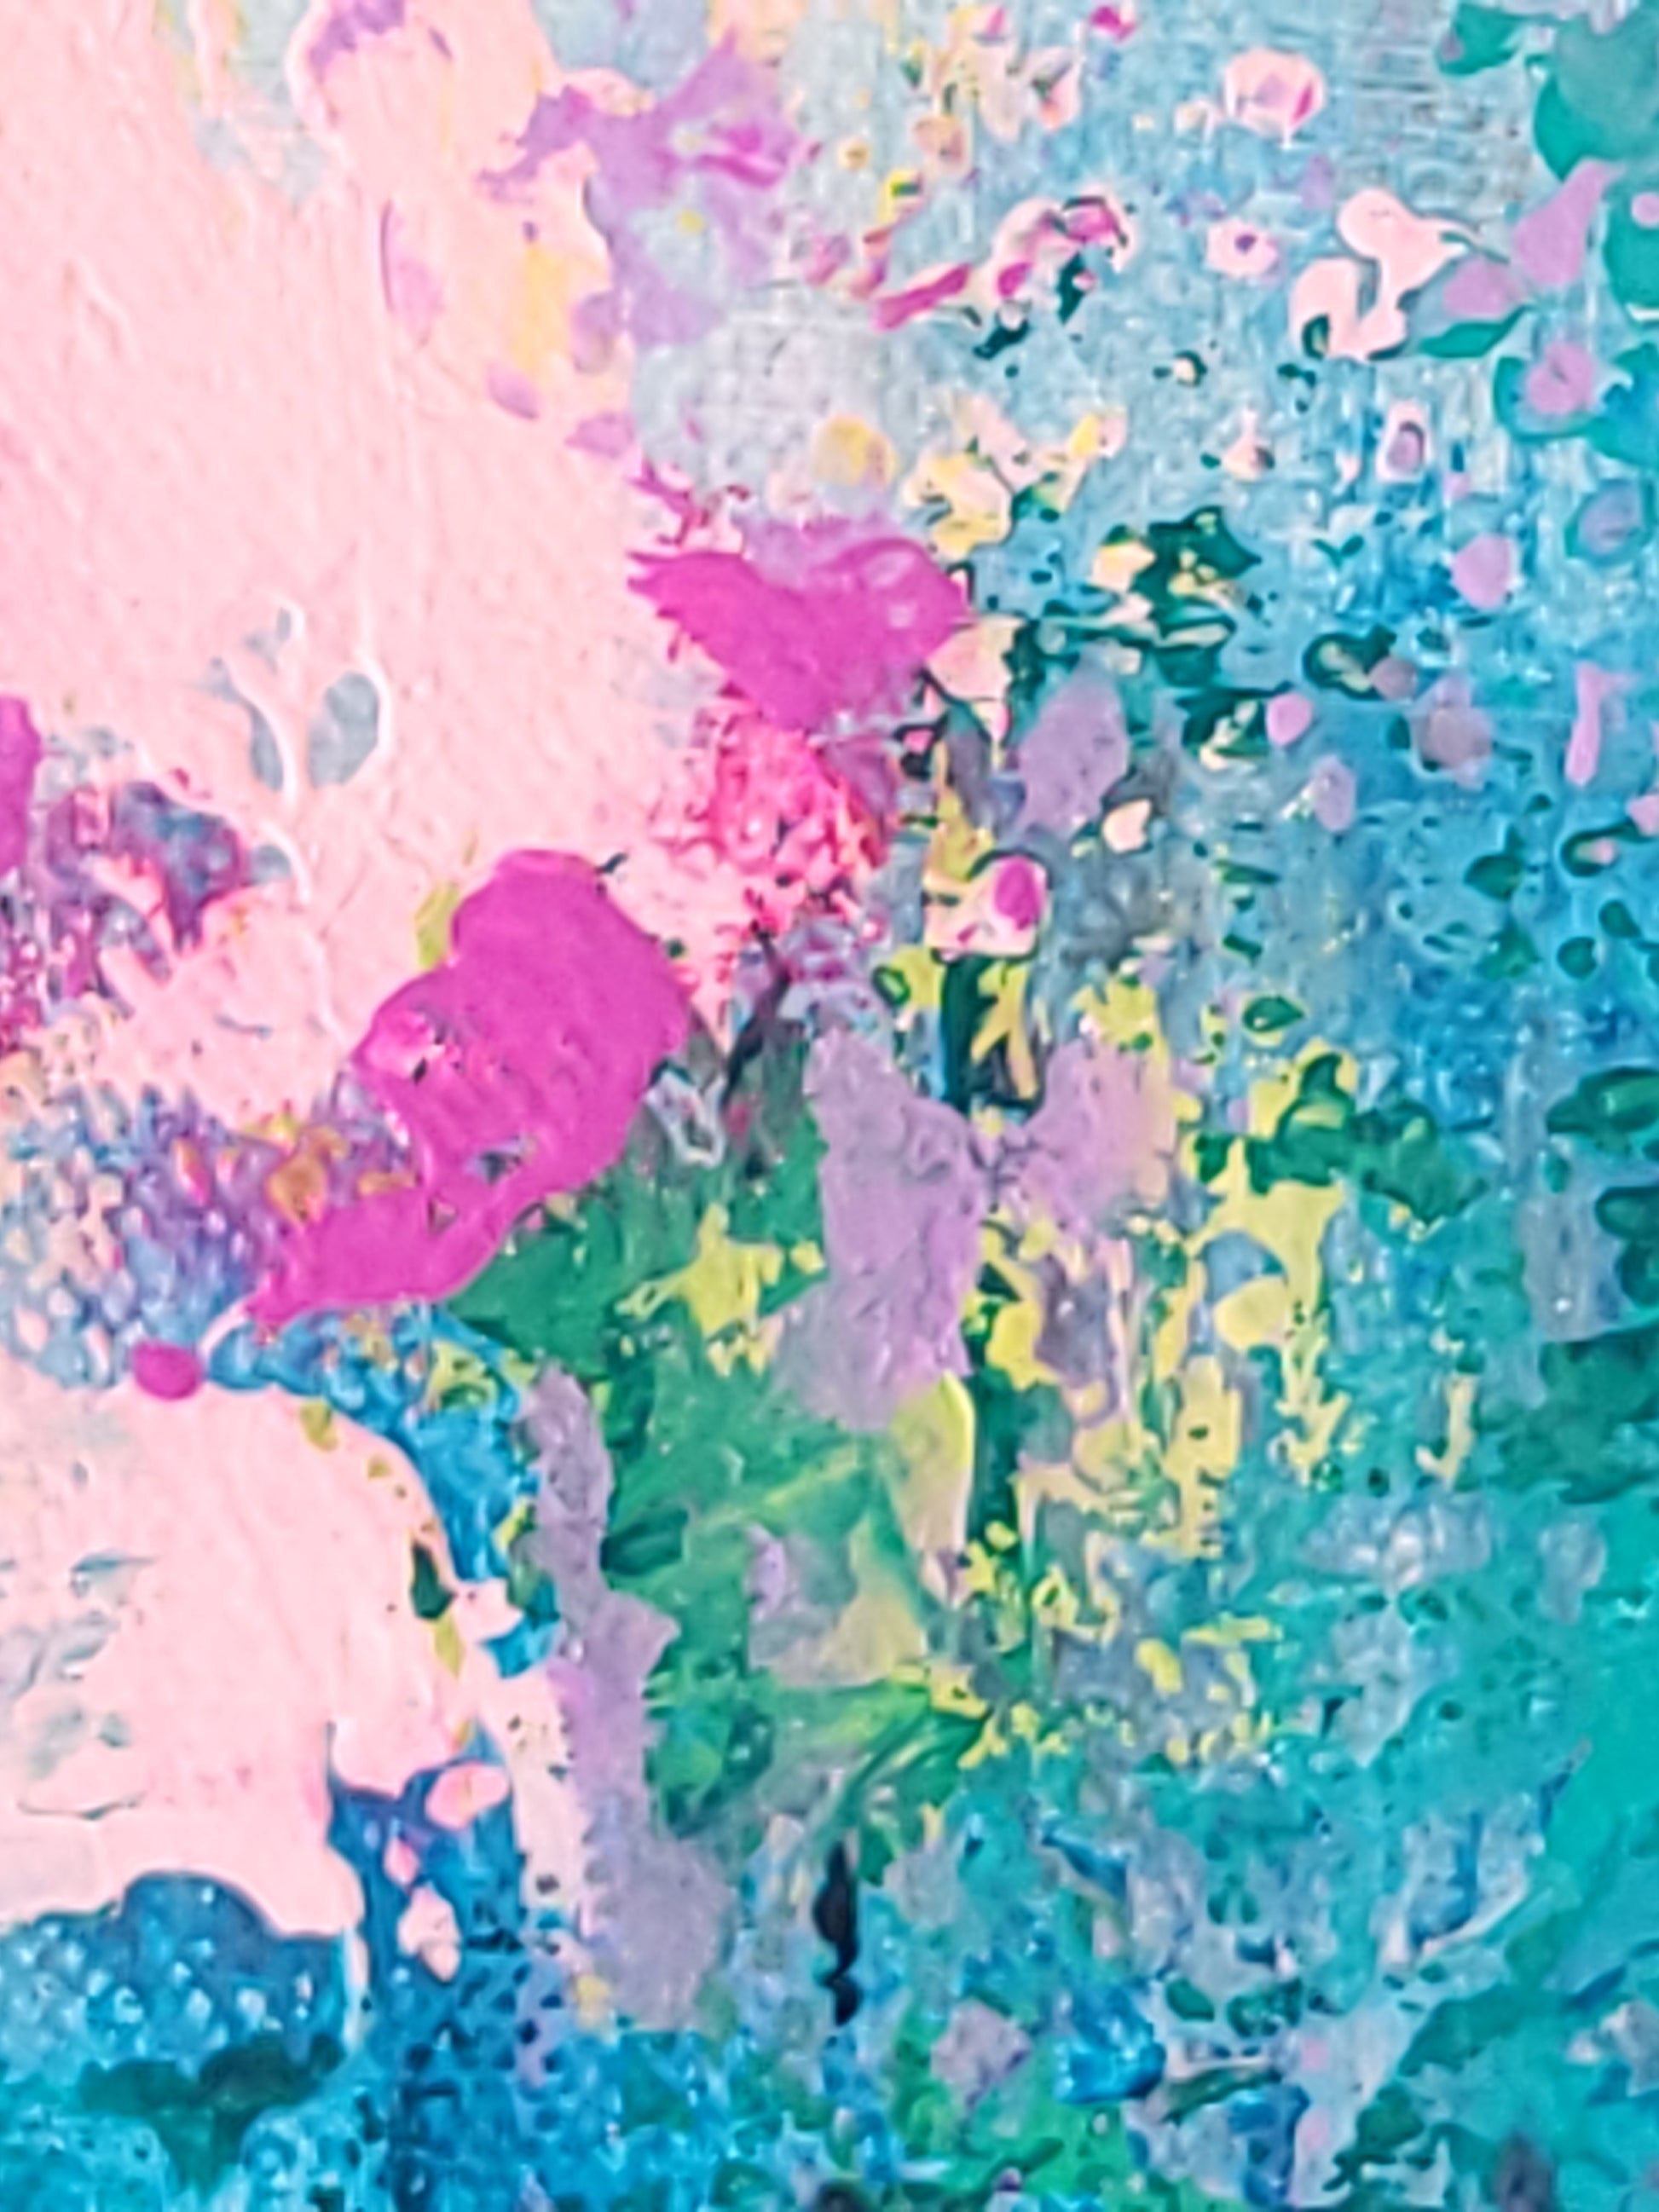 Detail of colors in Out of the Blue.